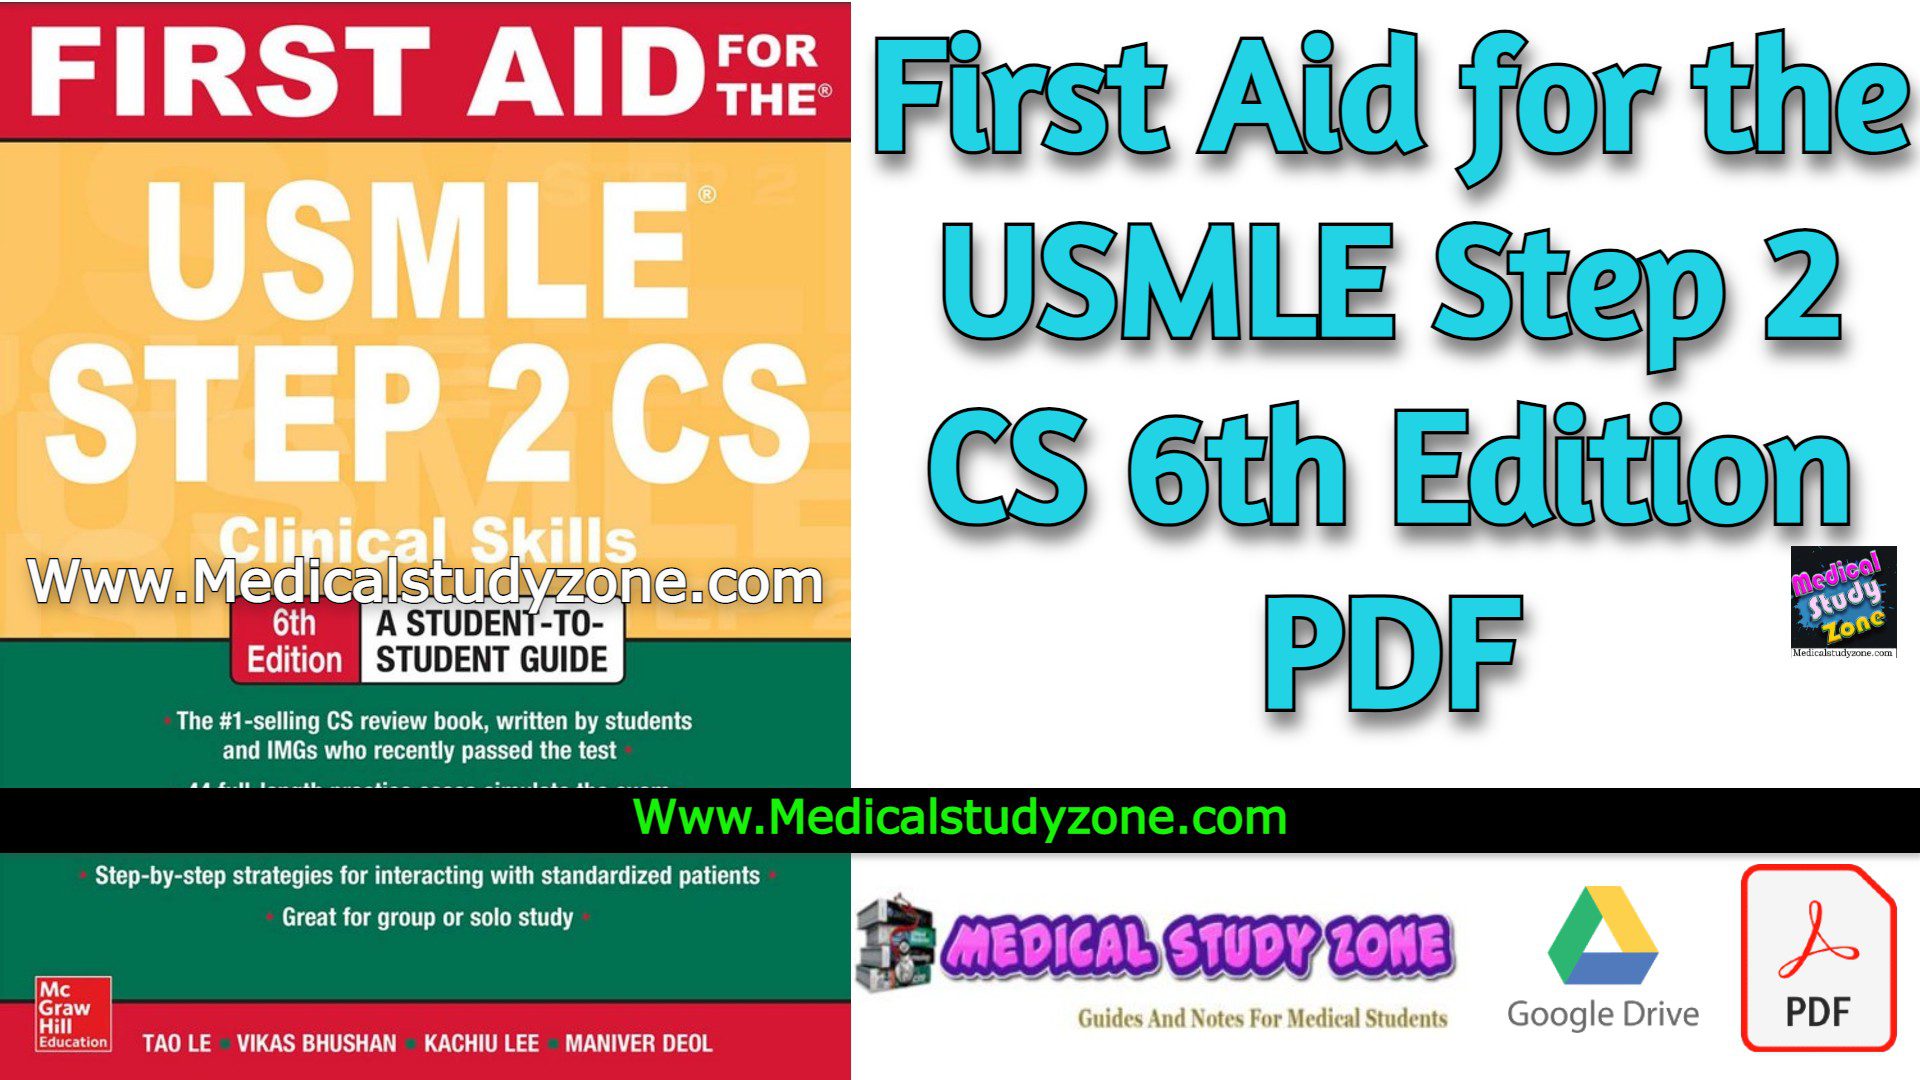 First Aid for the USMLE Step 2 CS 6th Edition PDF Free Download [Direct Link]